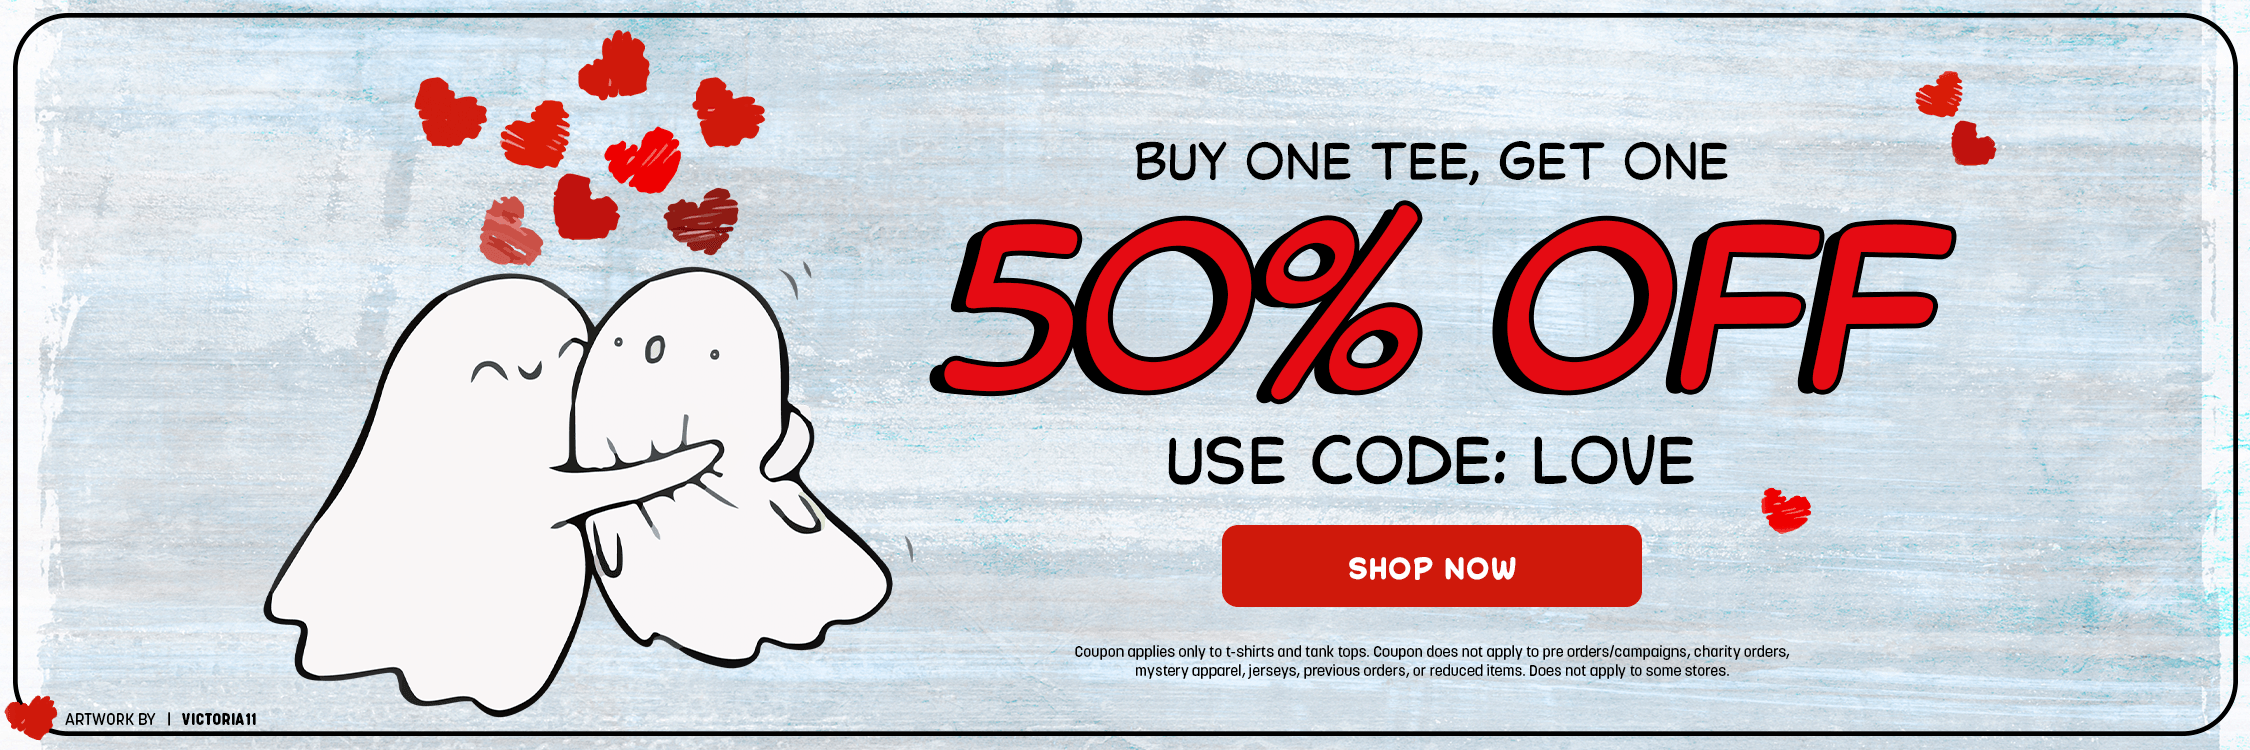 Buy One Tee, Get One Tee 50% Off. Code LOVE. Shop Now.  Ghost graphic. Exclusions apply.